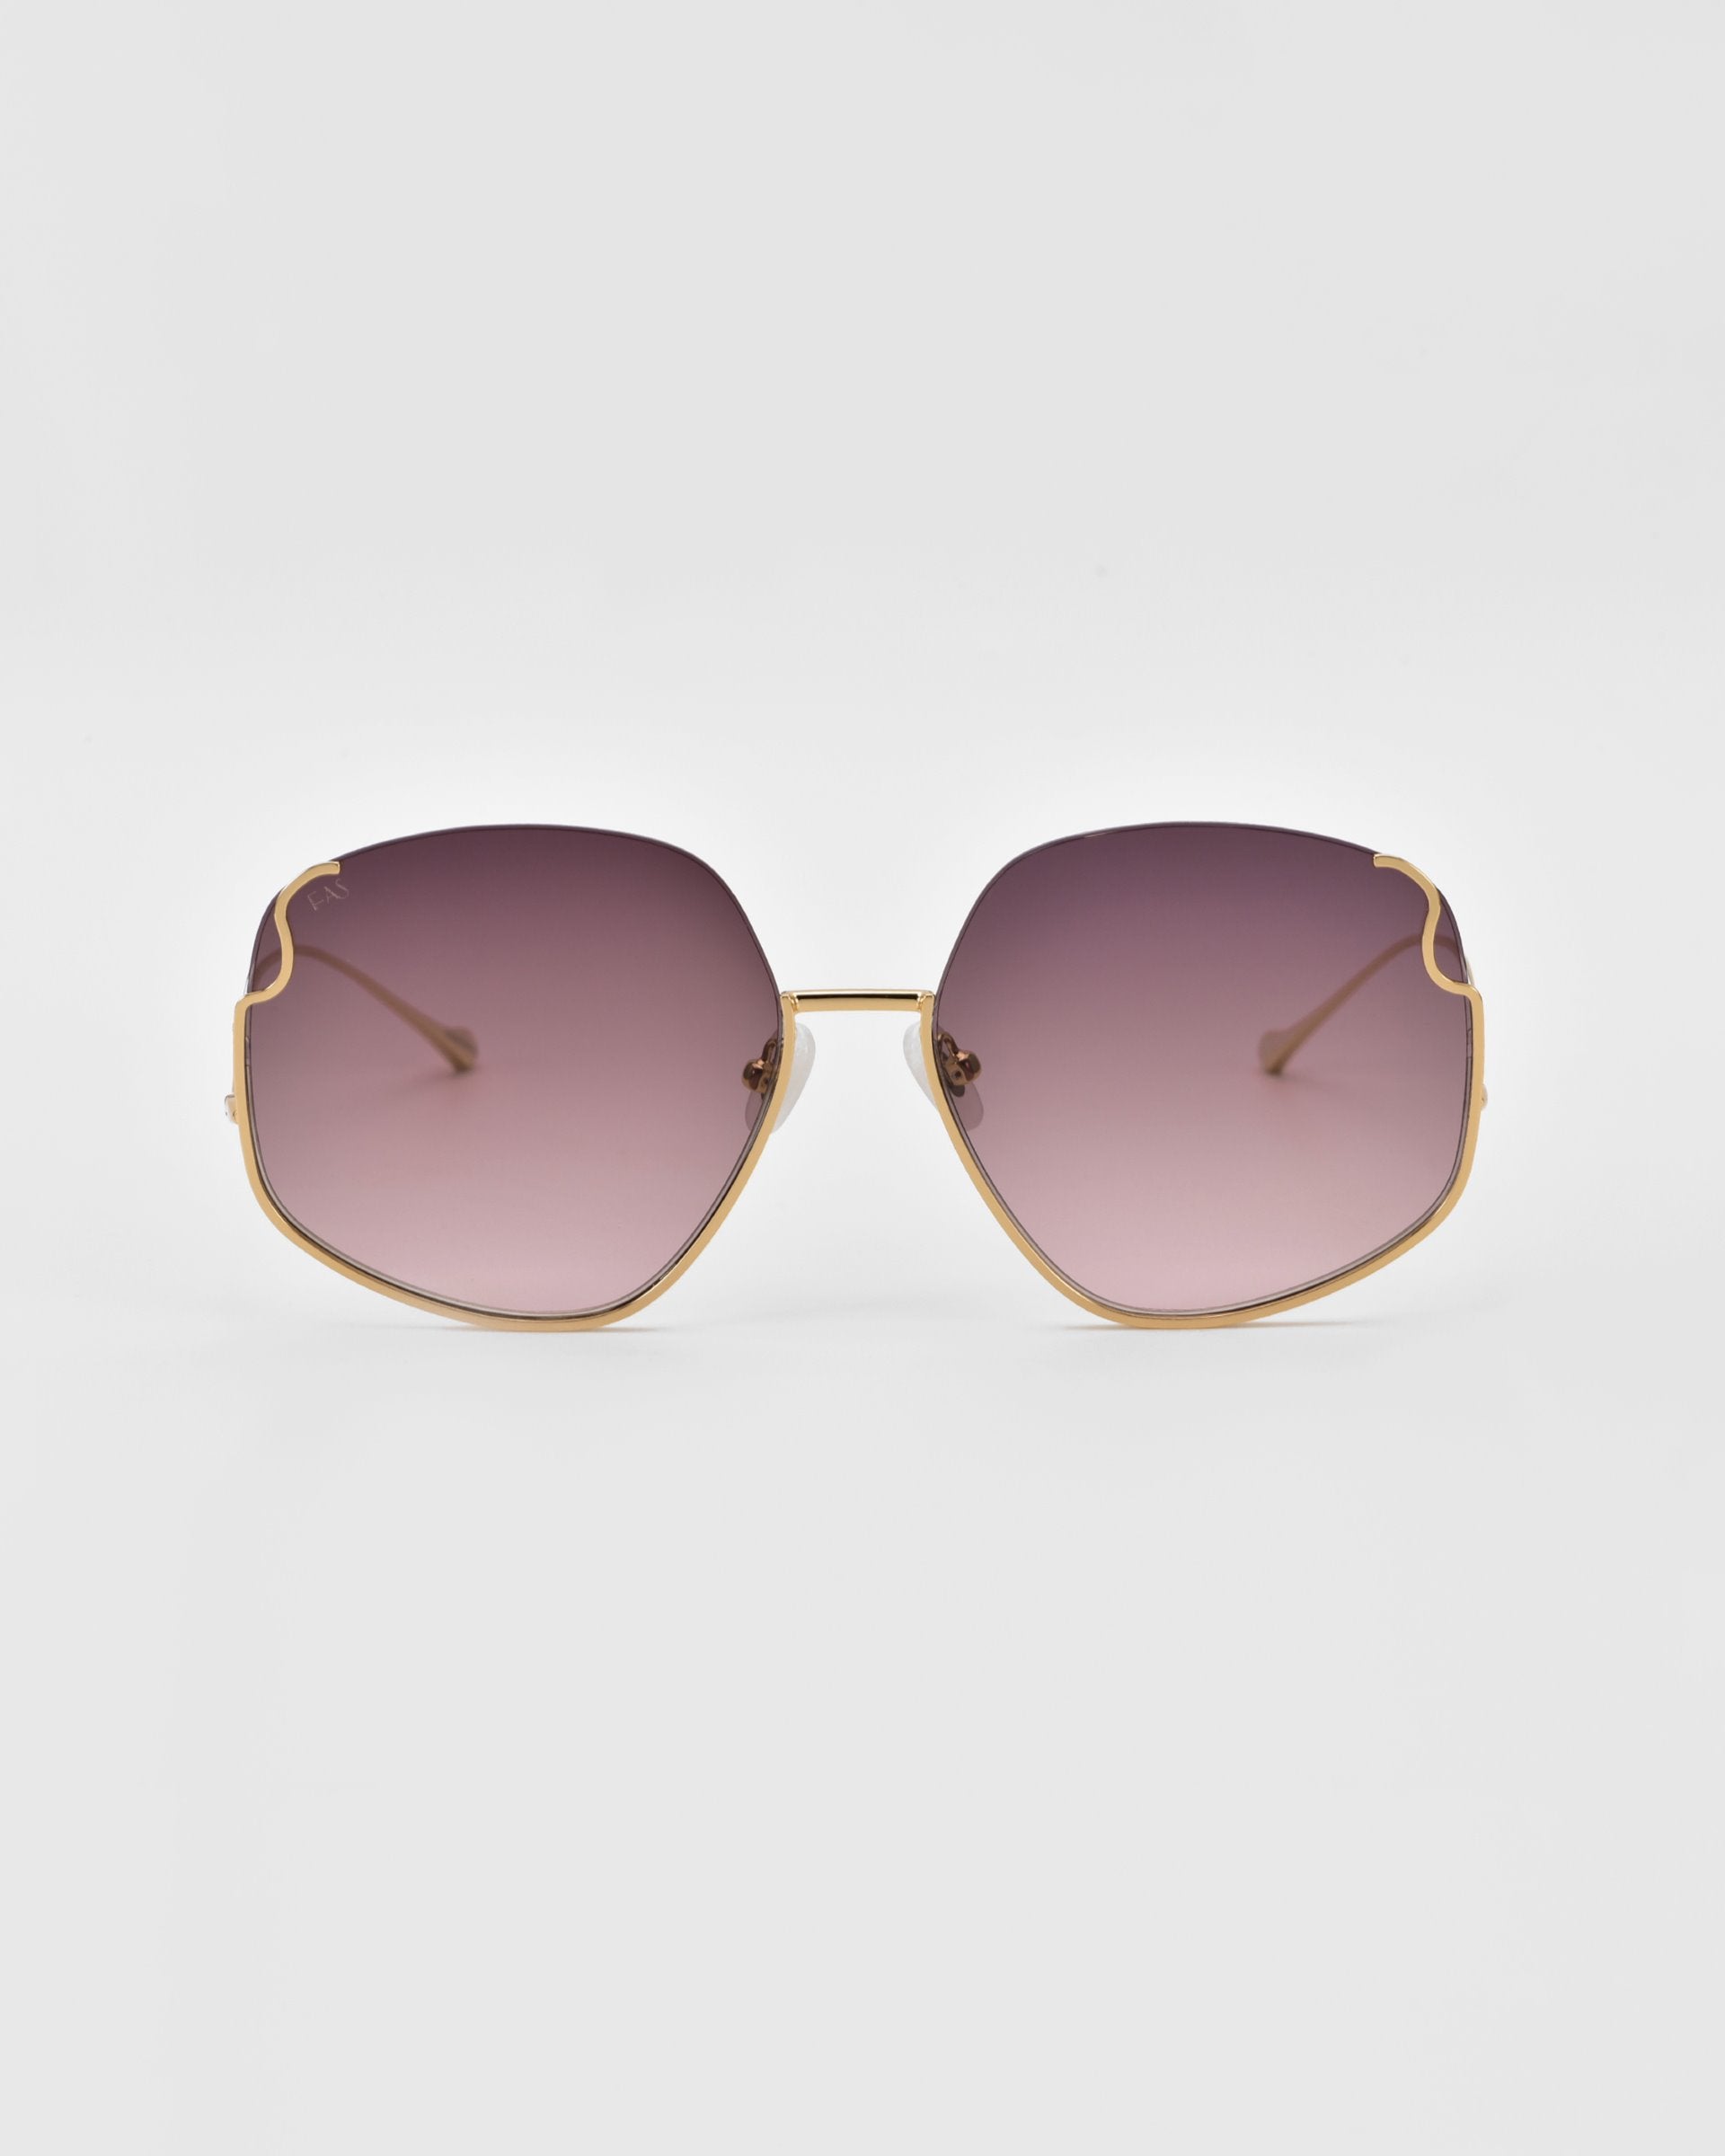 A pair of luxurious Drape sunglasses by For Art's Sake® with large, hexagonal lenses featuring a gradient tint from dark purple at the top to lighter purple towards the center. The gold-colored frame showcases intricate metal detailing and thin, delicate arms.